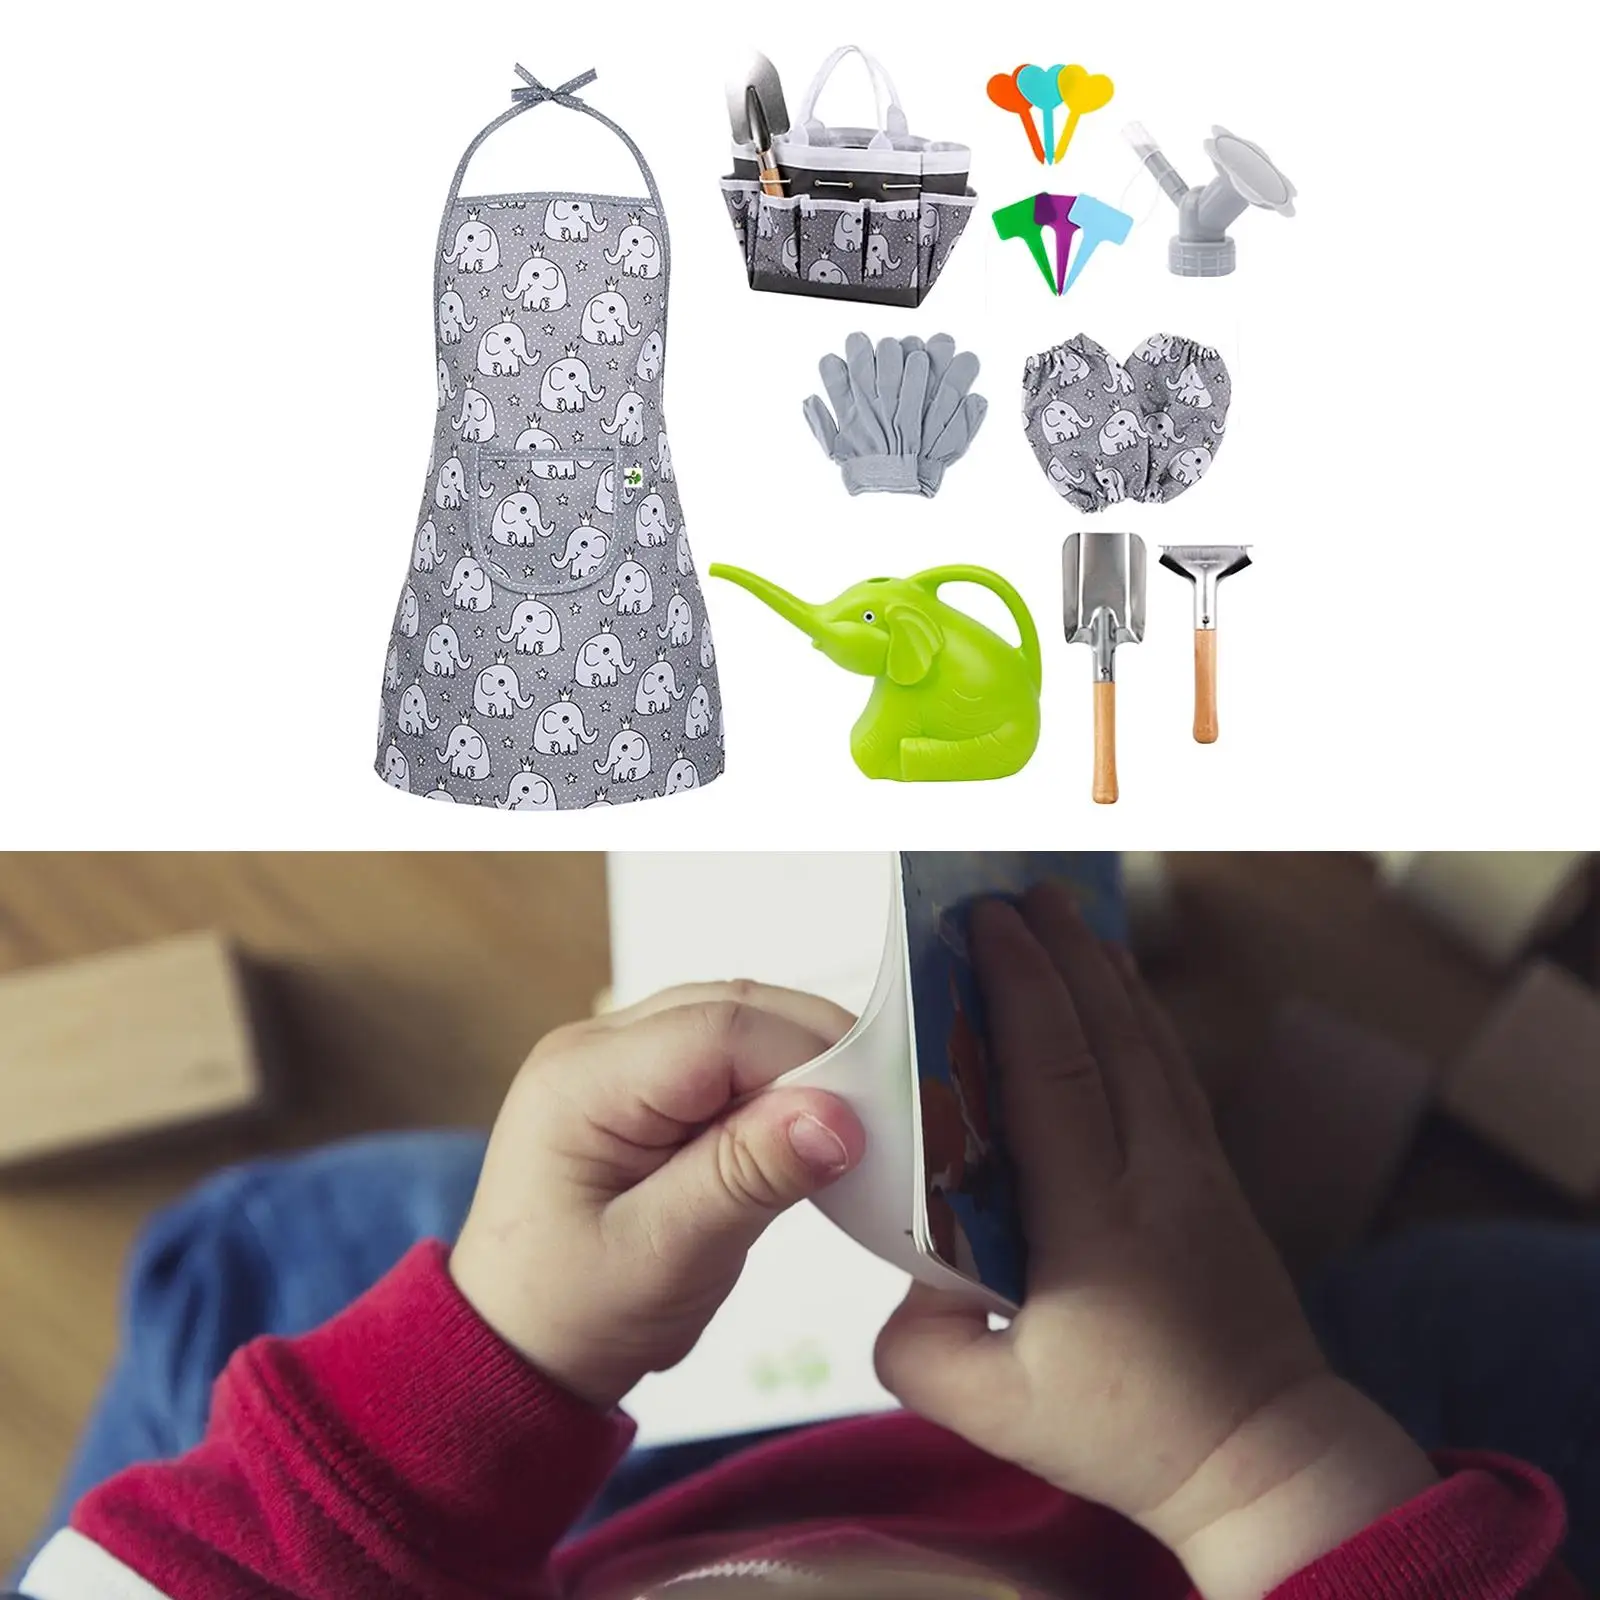 Kids Garden Tool Set Elephant Apron Age 3+ Oversleeves Animal Watering Can Sprinkler Toys Birthday with Handbag Sand Pits Toys